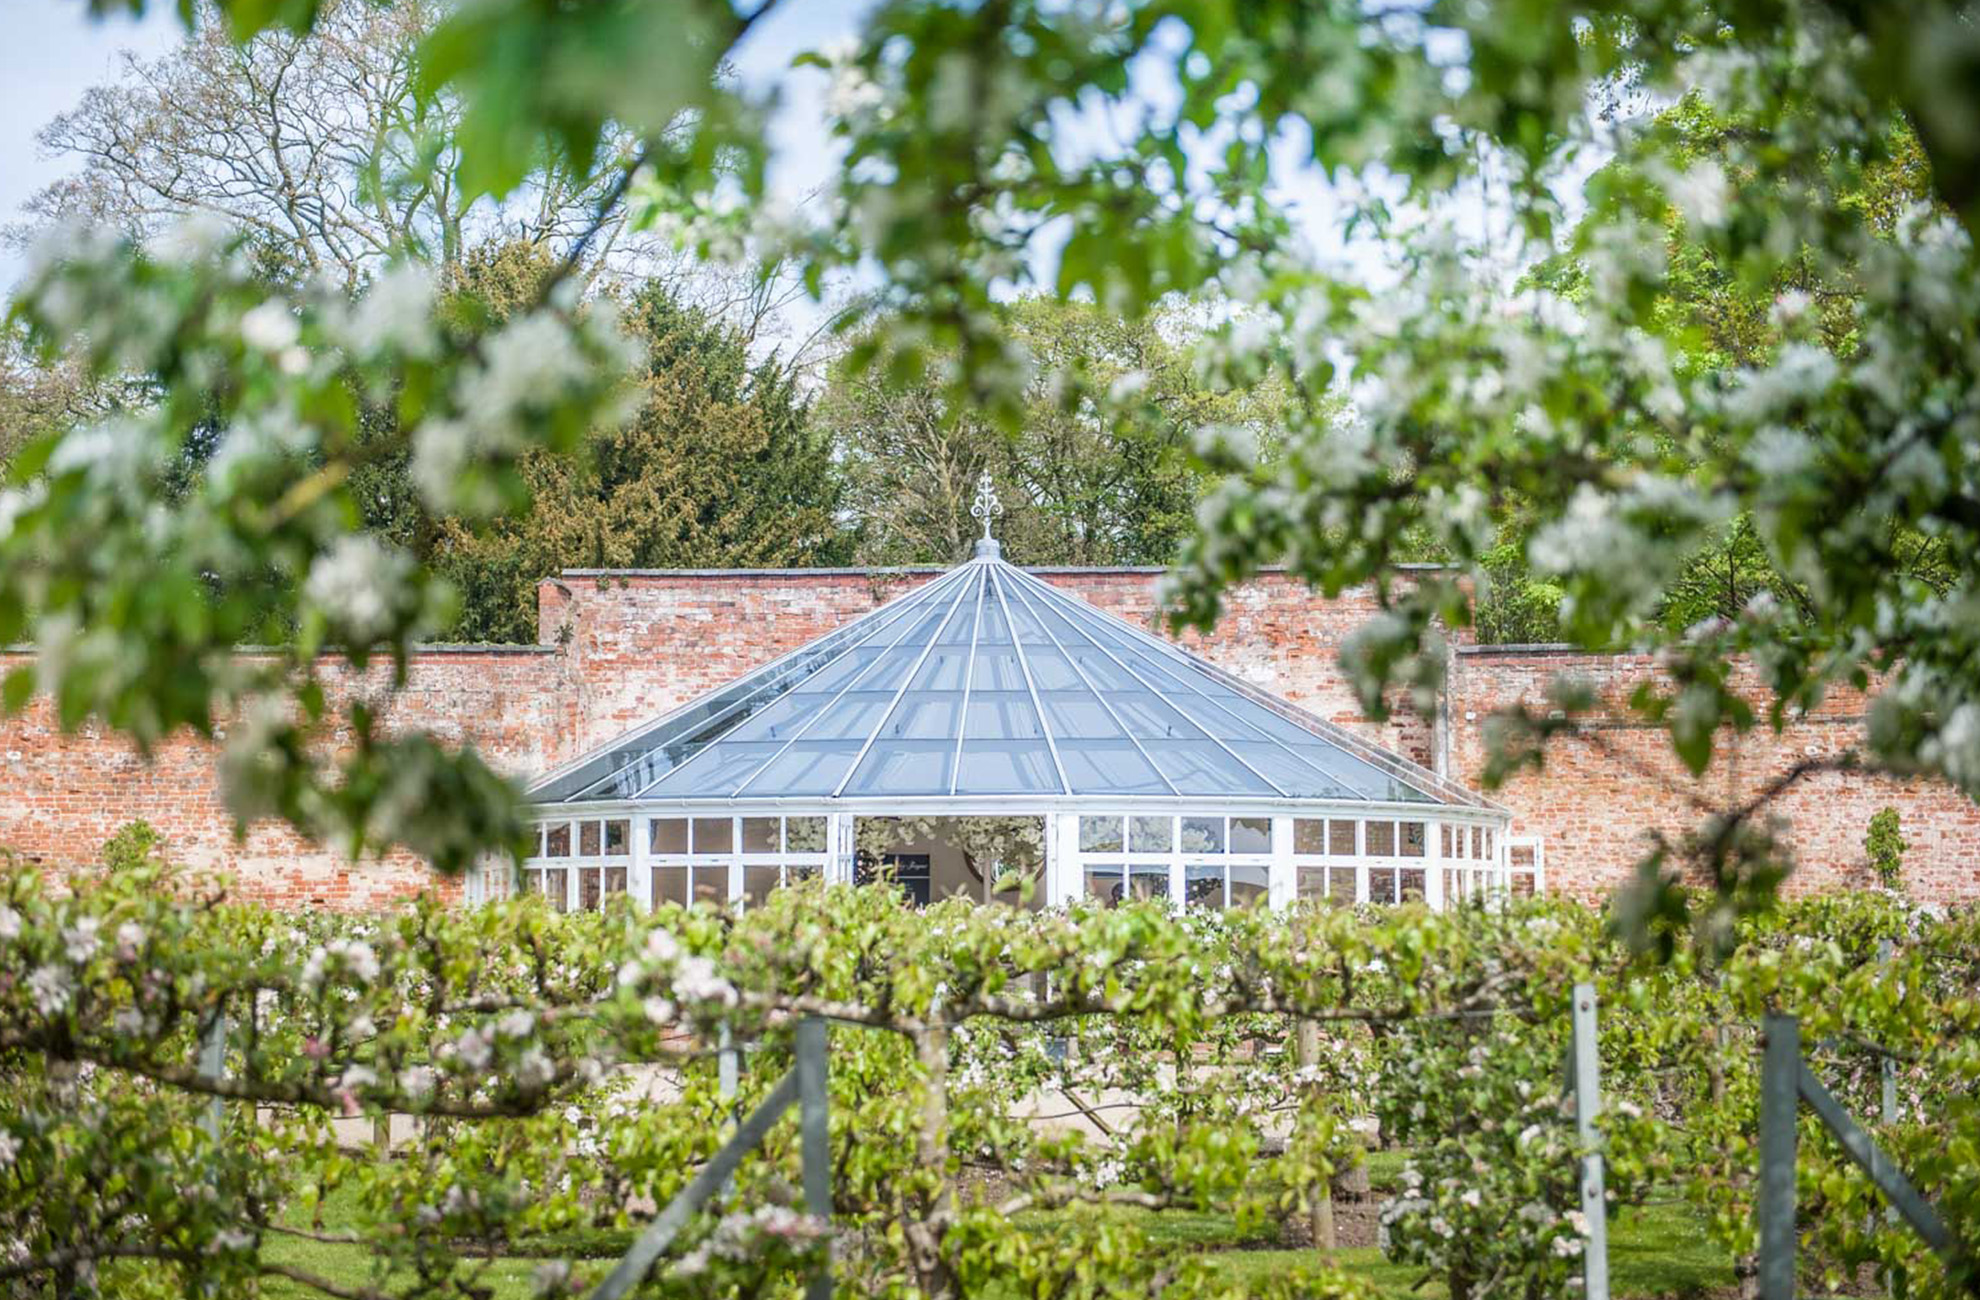 Outdoors weddings at Combermere Abbey - the Glasshouse